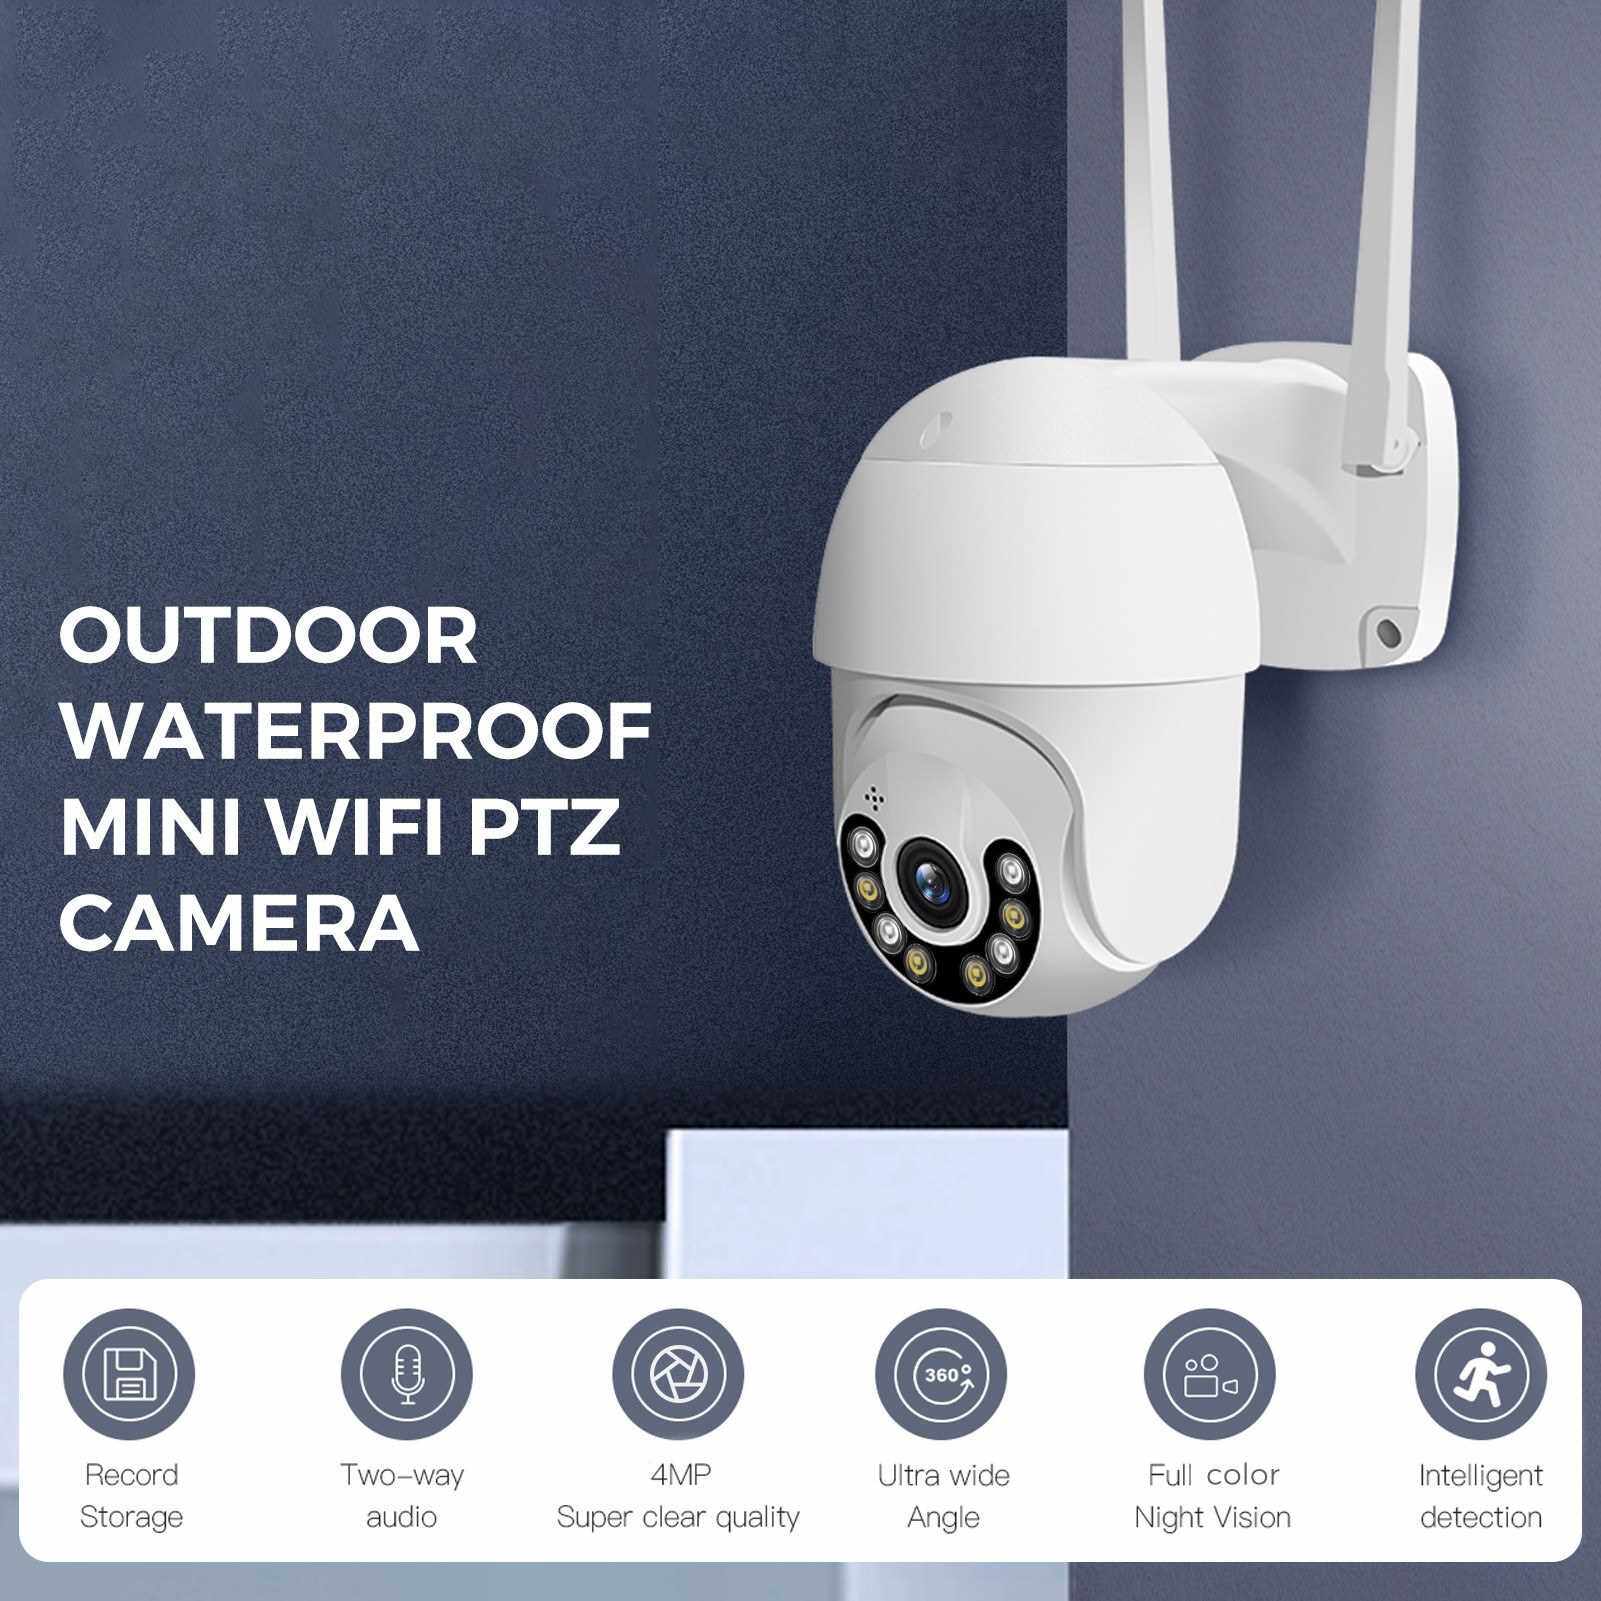 Outdoor WiFi PTZ Camera, 4MP Wireless WiFi IP Camera Home Security System with 360 View, Color Night Vision, 2-Way Audio, Motion Detection, Activity Alert, Remote Access, IP65 Waterproof (White)